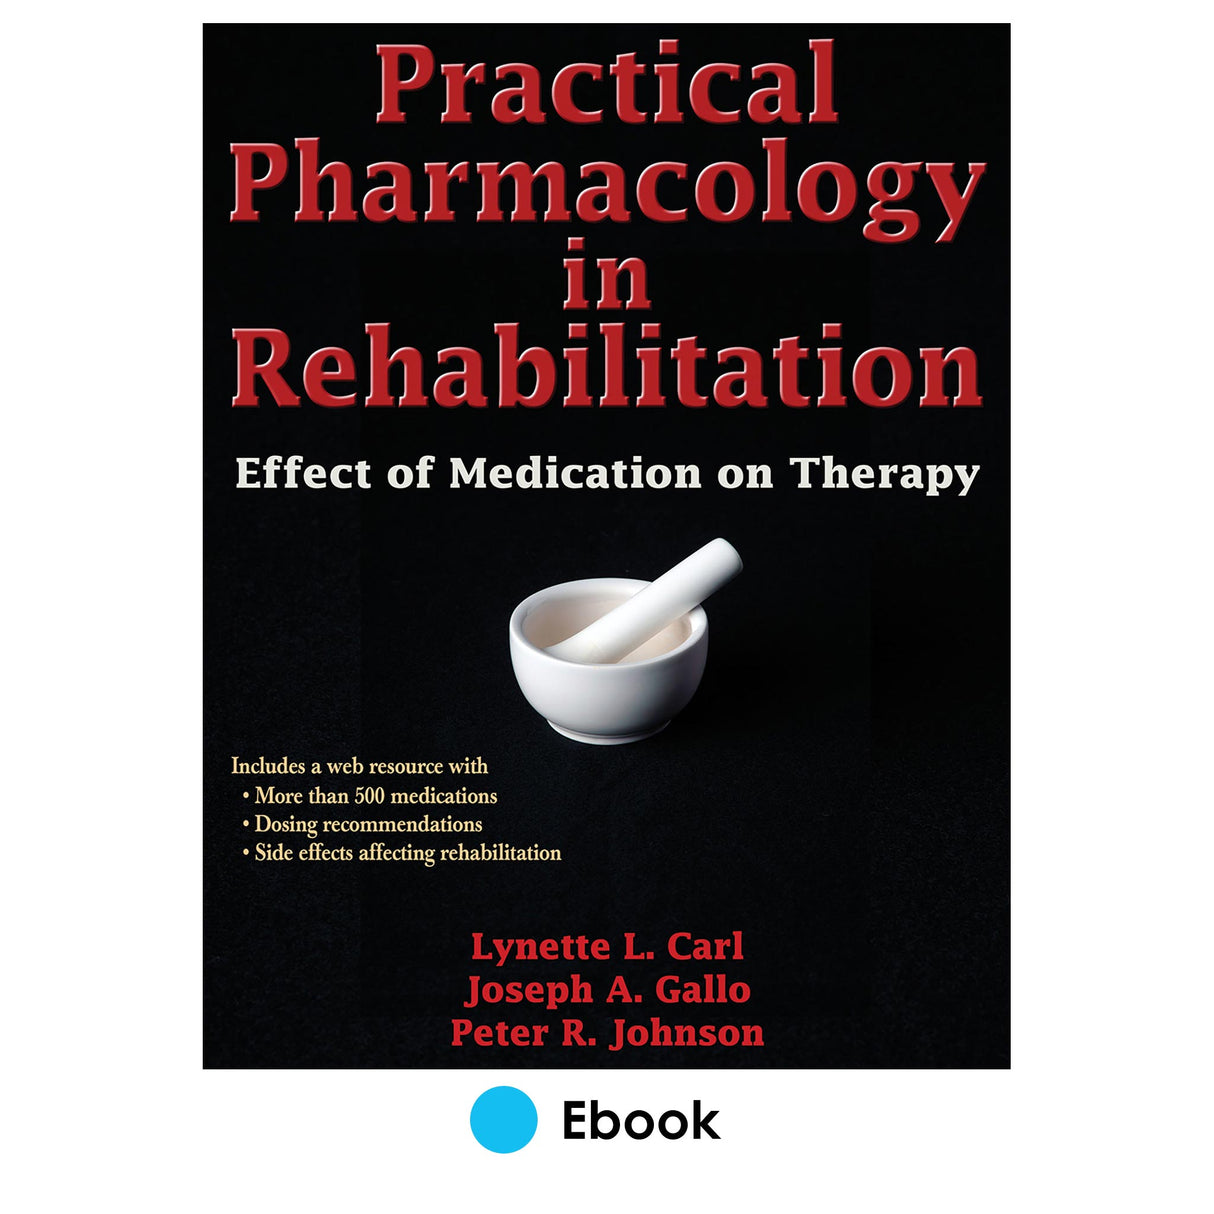 Practical Pharmacology in Rehabilitation PDF With Web Resource